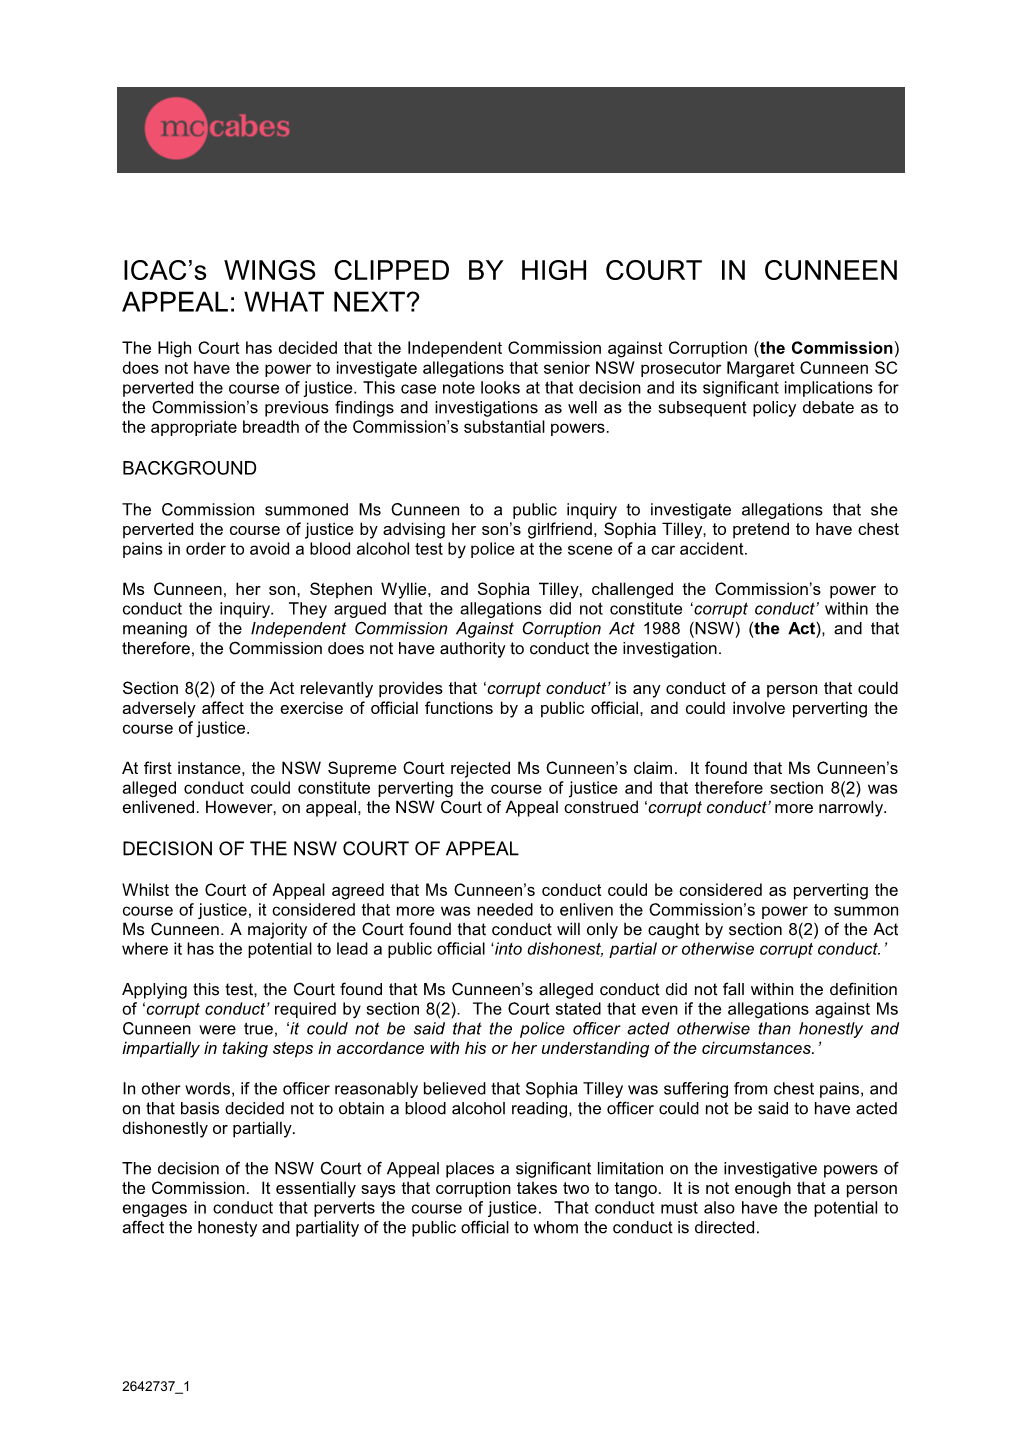 ICAC's WINGS CLIPPED by HIGH COURT IN